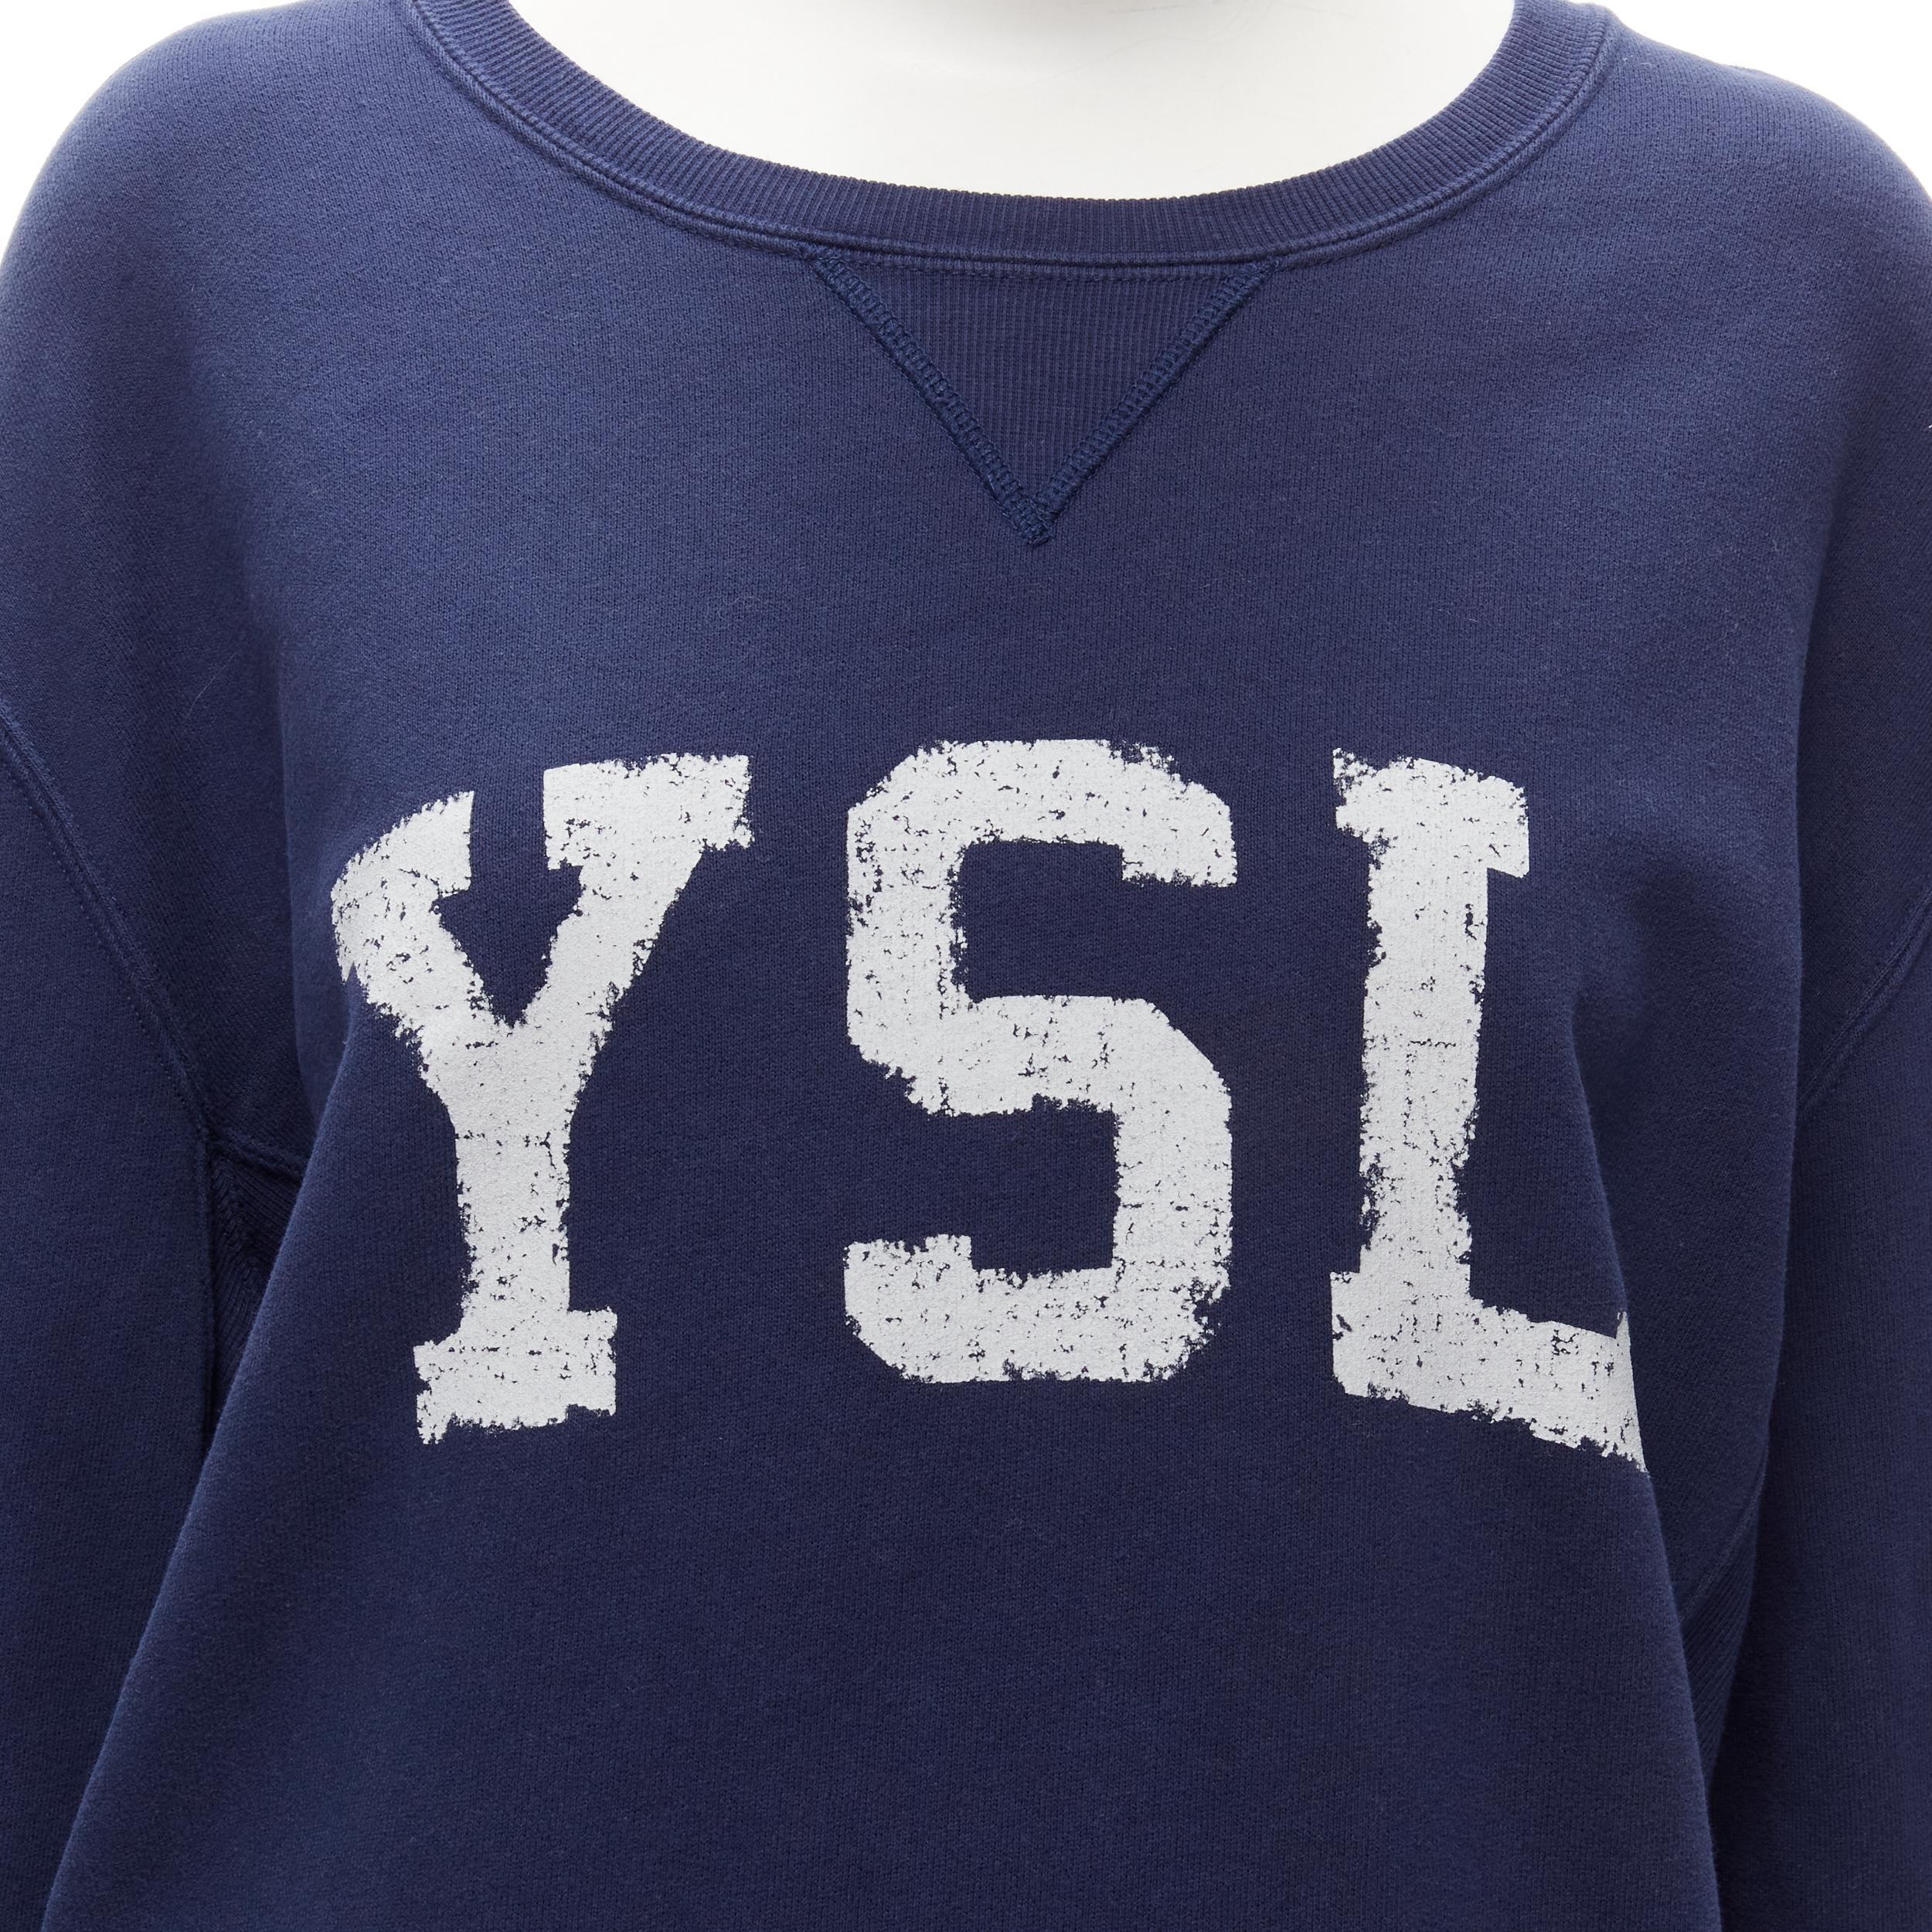 SAINT LAURENT 2021 YSL distressed logo navy blue fleece pullover sweatshirt L
Reference: TGAS/C01704
Brand: Saint Laurent
Designer: Anthony Vaccarello
Collection: 2021
Material: Cotton
Color: Blue, White
Pattern: Solid
Closure: Pullover
Made in: